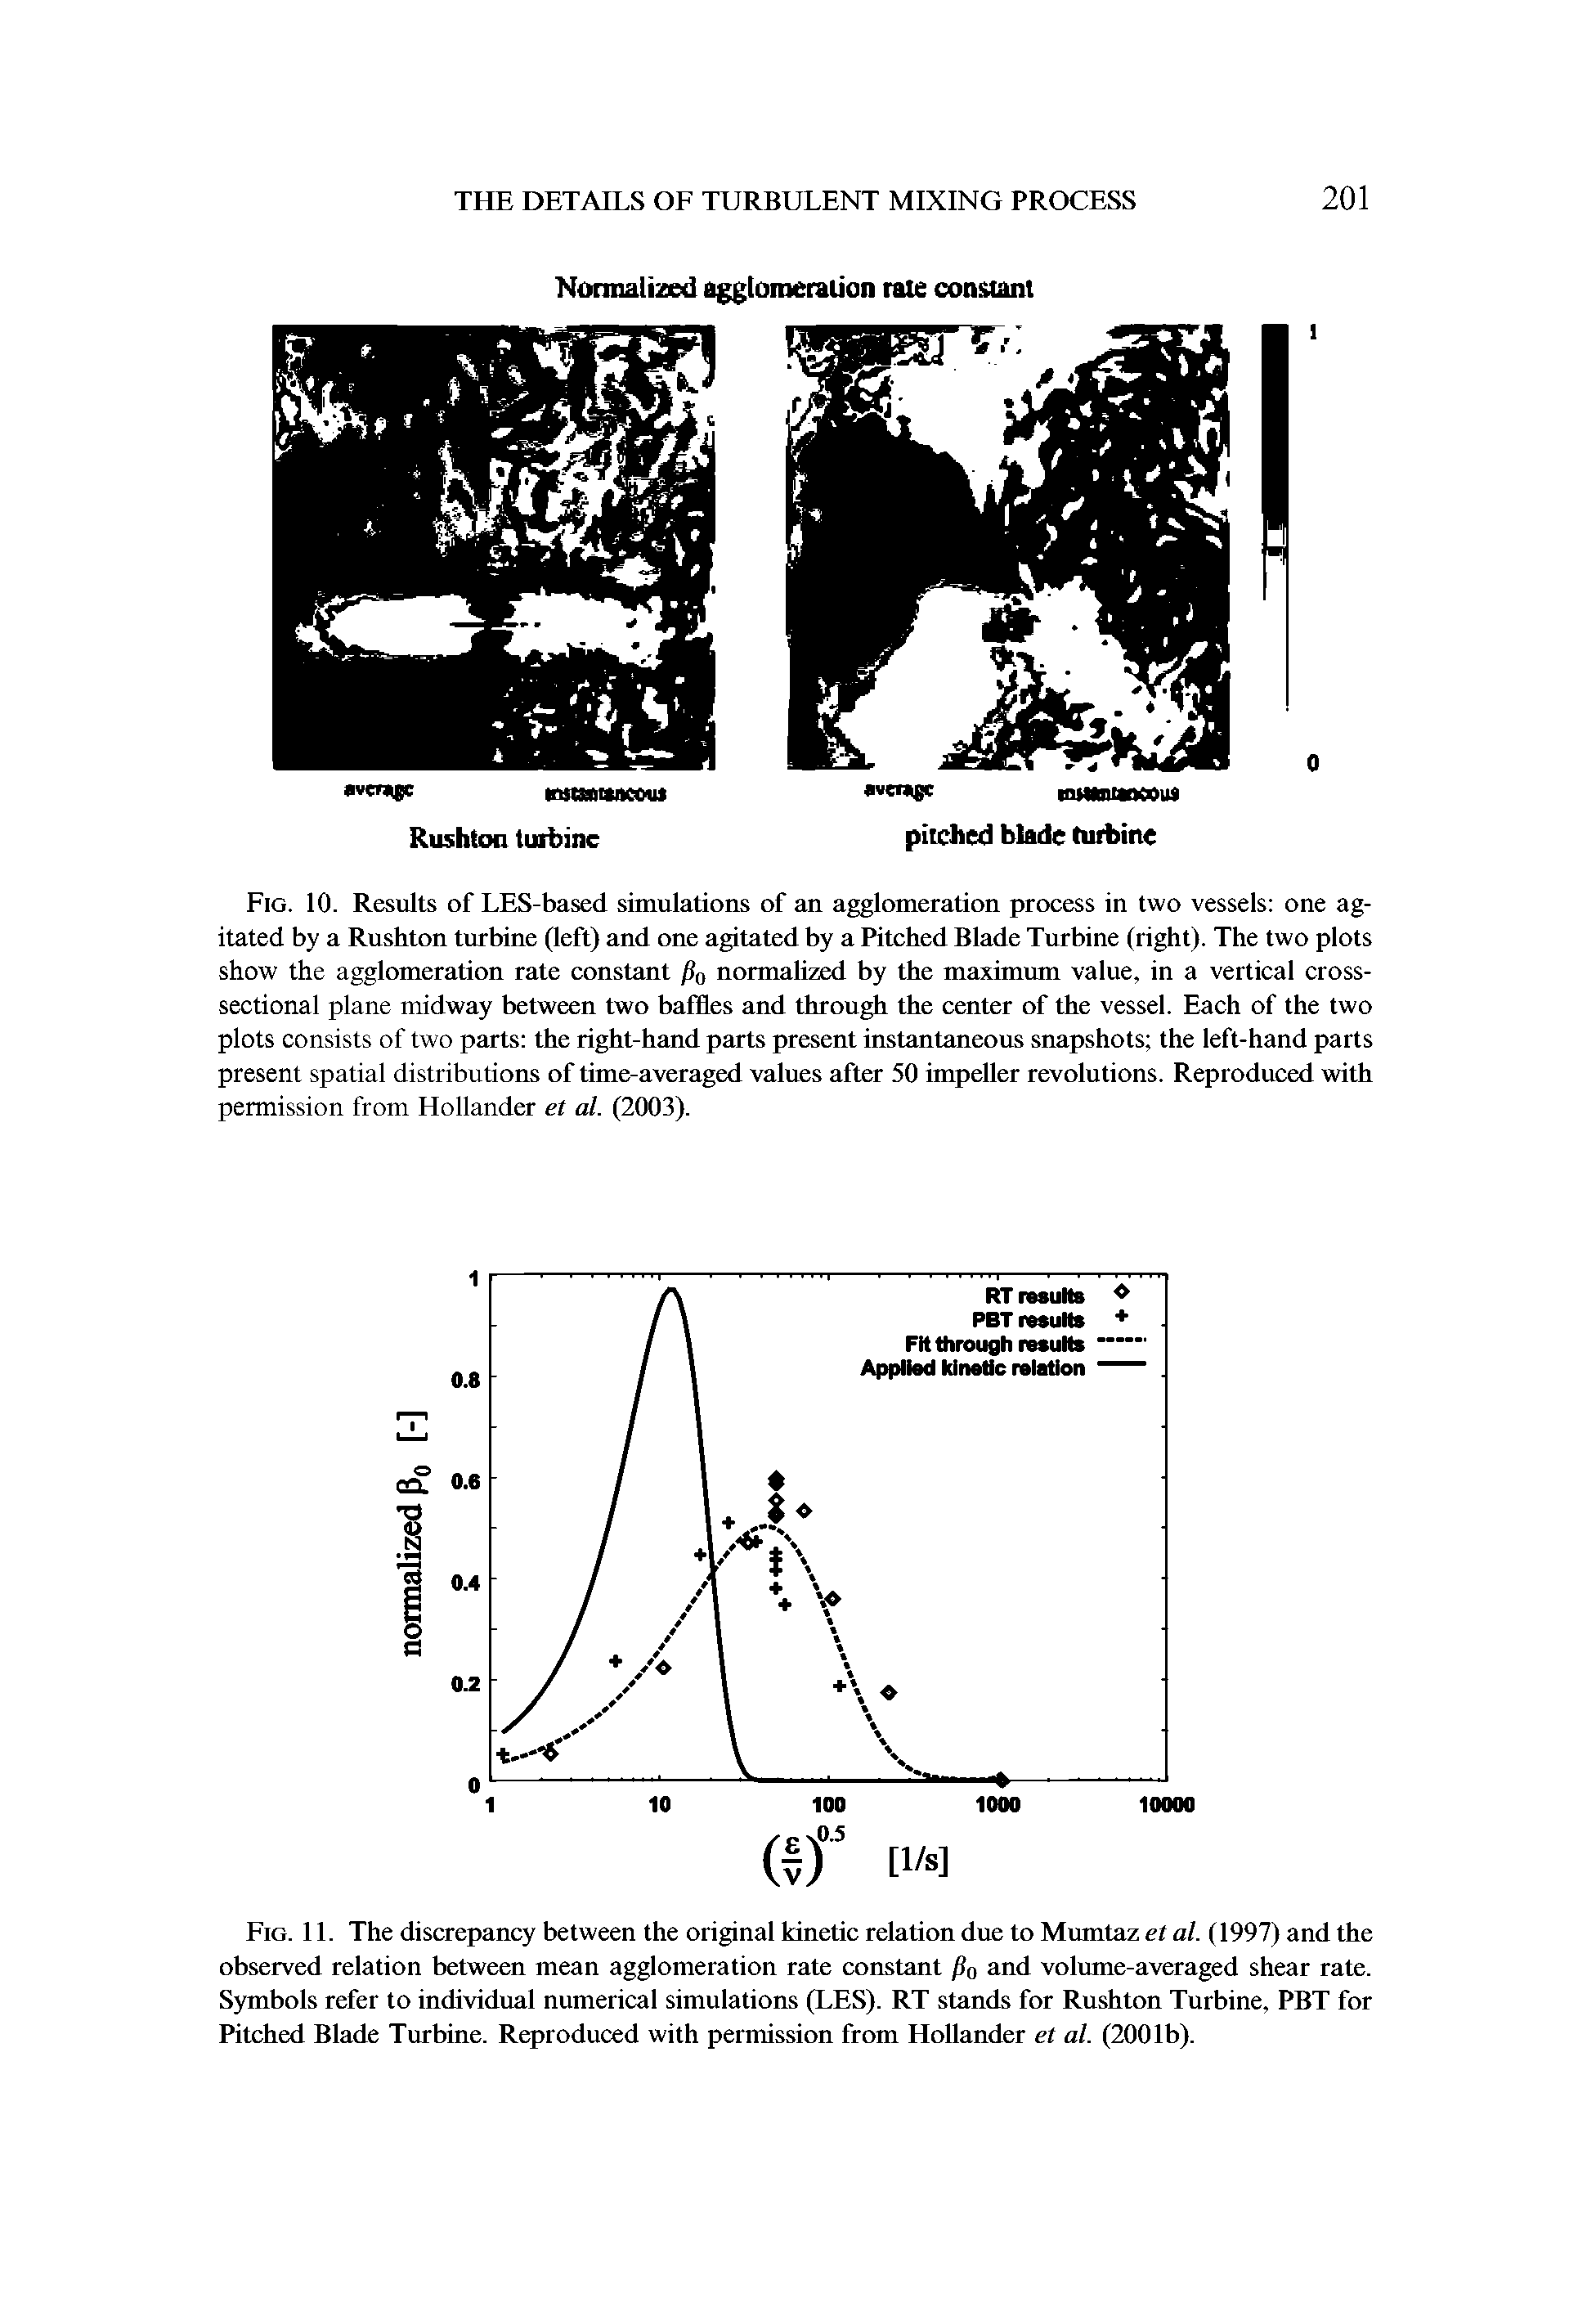 Fig. 11. The discrepancy between the original kinetic relation due to Mumtaz et al. (1997) and the observed relation between mean agglomeration rate constant fl0 and volume-averaged shear rate. Symbols refer to individual numerical simulations (LES). RT stands for Rushton Turbine, PBT for Pitched Blade Turbine. Reproduced with permission from Hollander et al. (2001b).